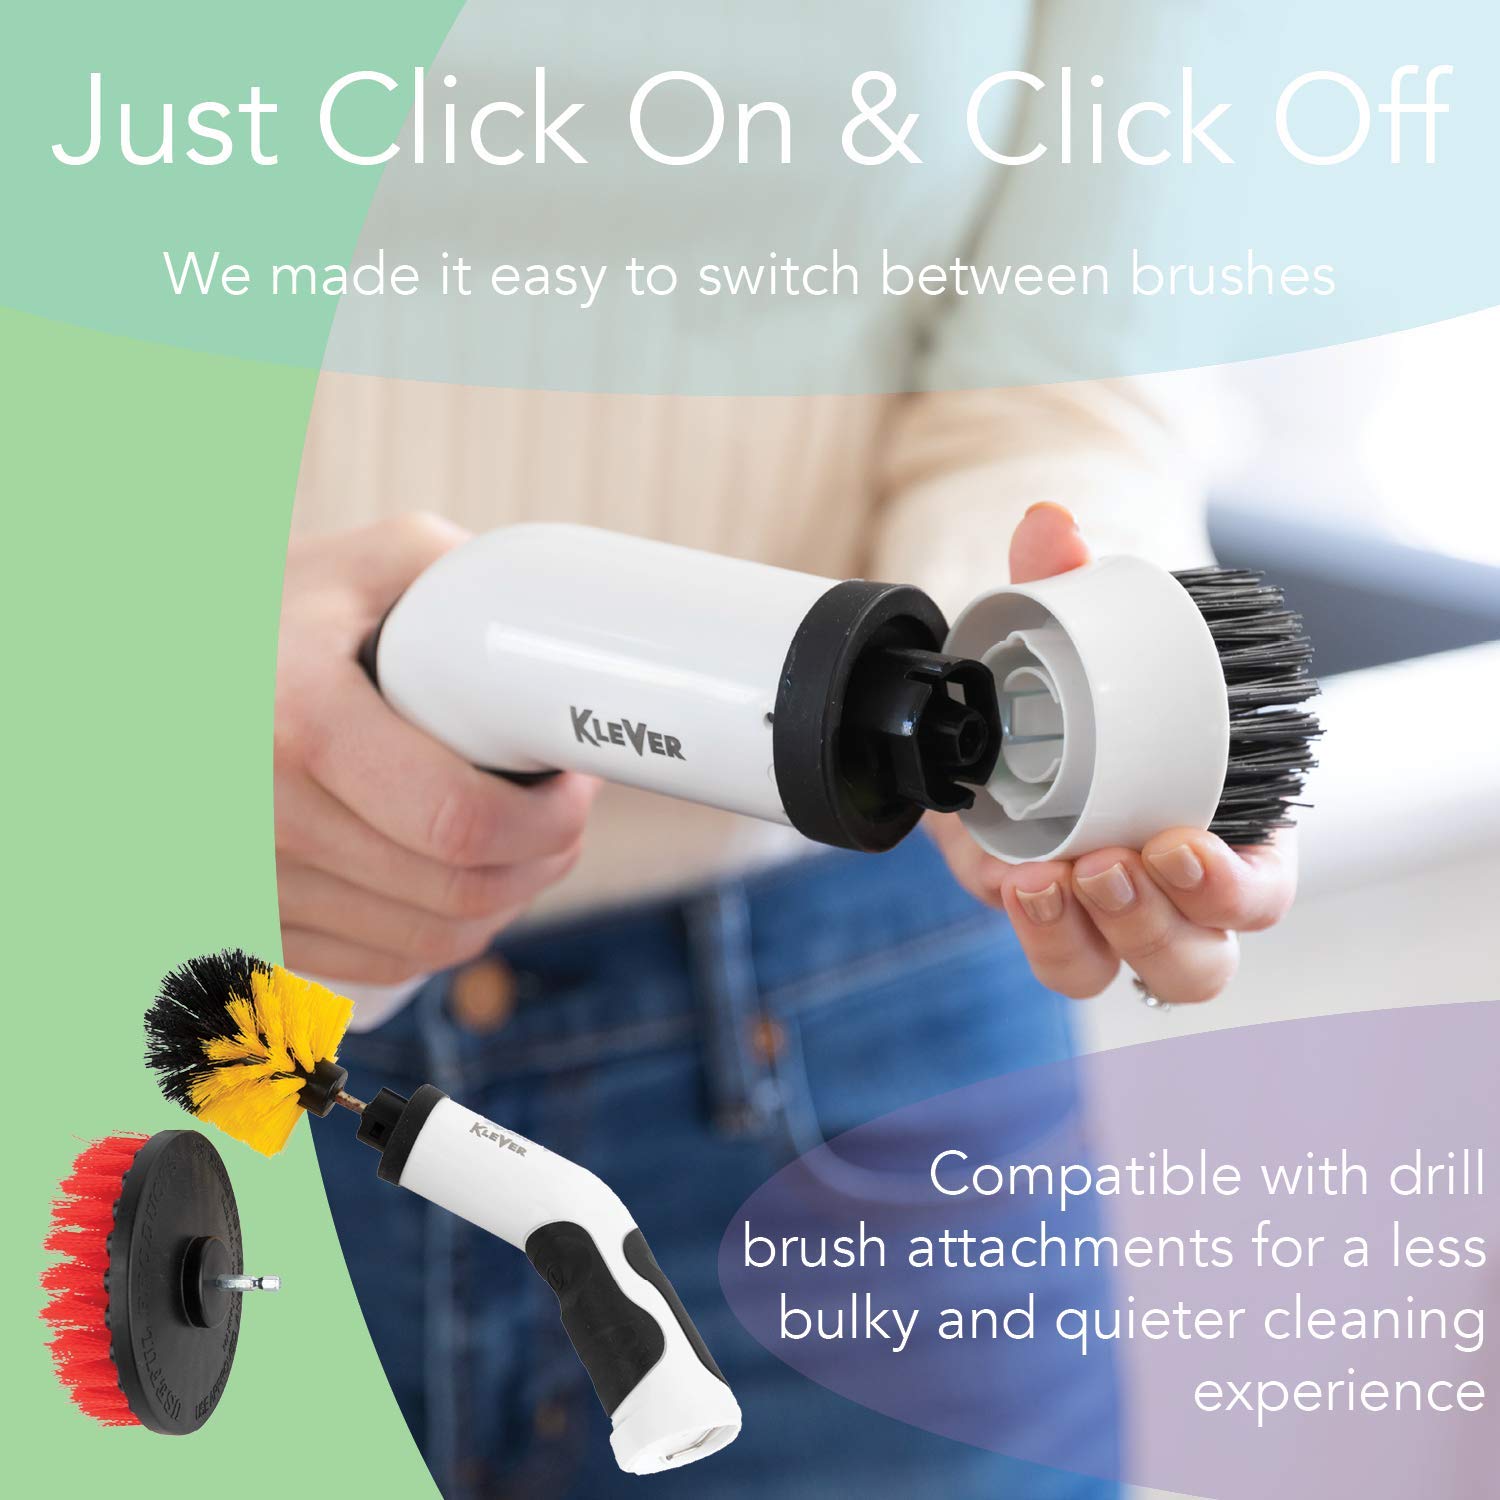 Klever Electric Spin Power Scrubber-The Expert Kitchen & Bathroom Cleaner | Includes 8 Versatile Scrub Brushes | Cordless, Rechargeable, & Lightweight